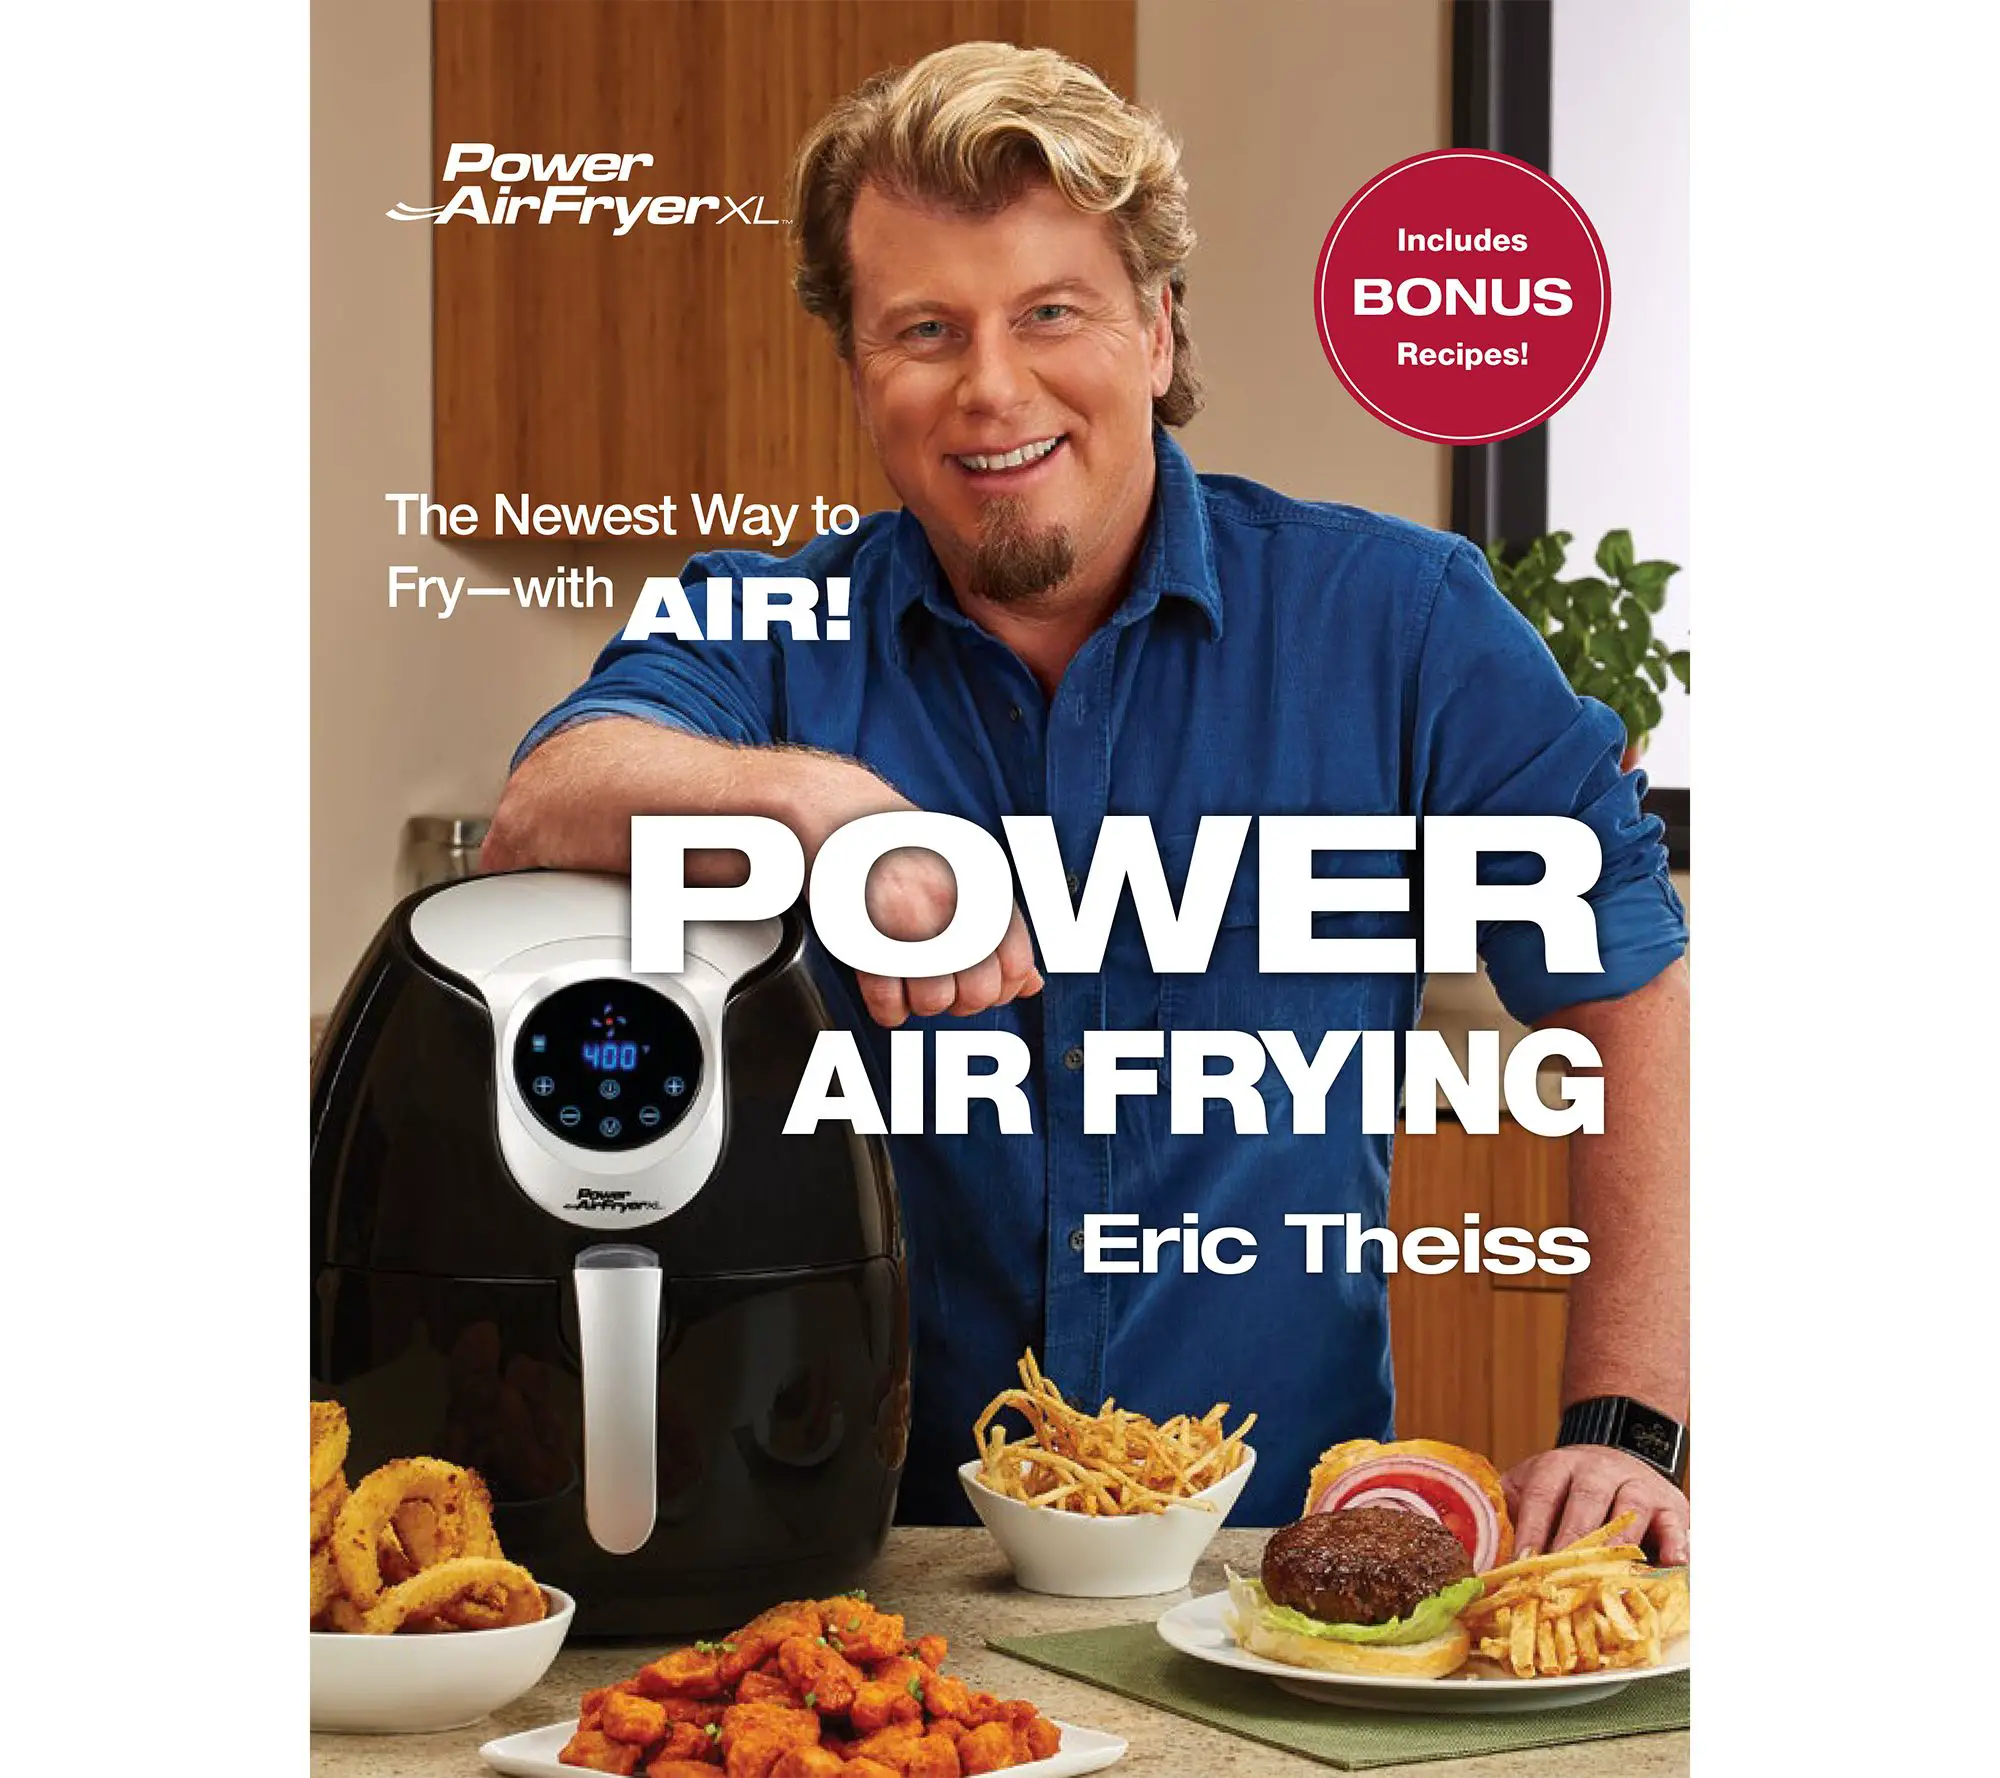 " Power Air Frying"  Cookbook by Eric Theiss